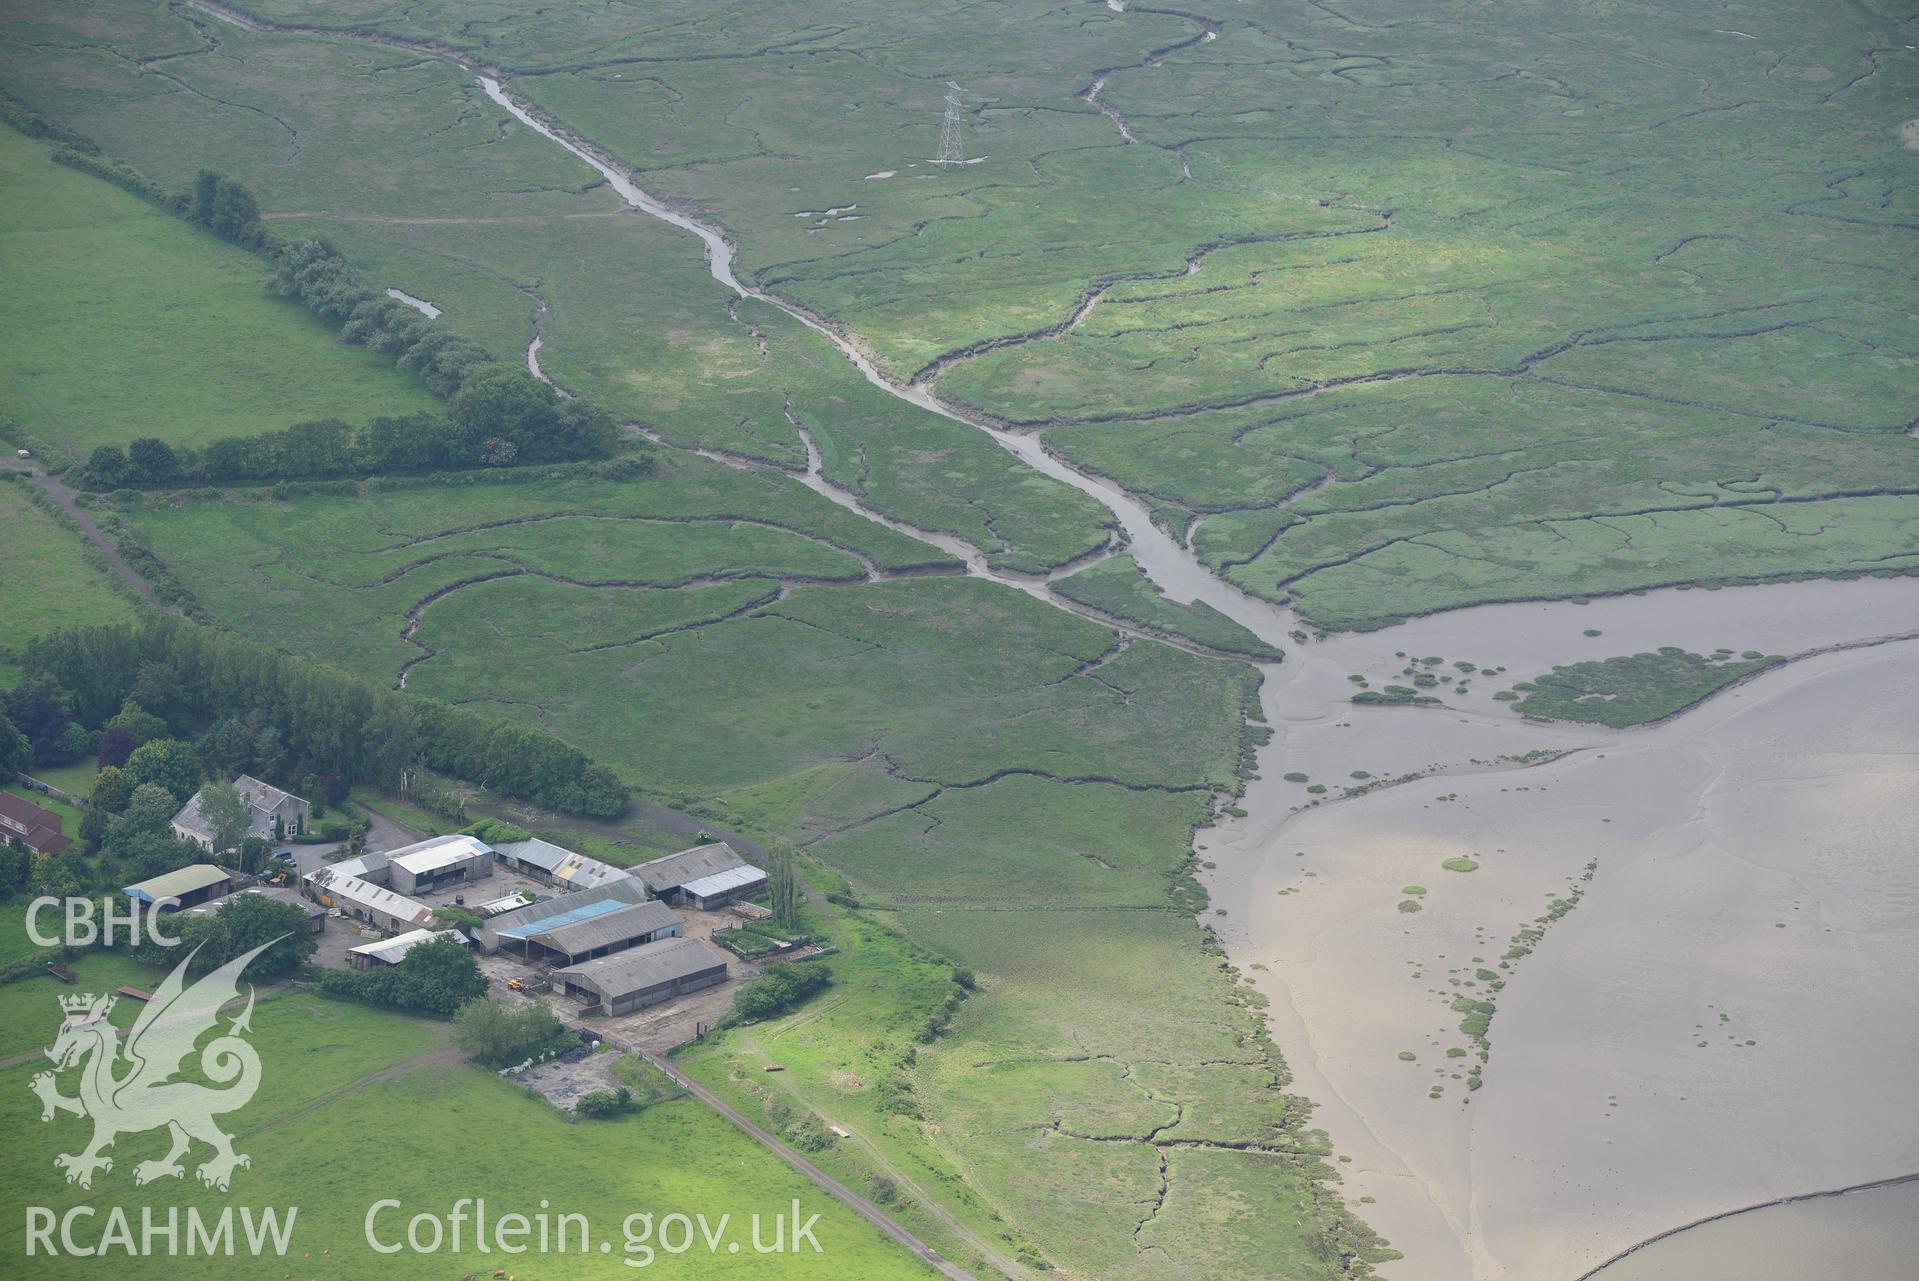 St. Michael's chapel; Cwrt-y-Carnau farmhouse and Cwrt-y-Carnau farmbuildings, near Gorseinon, Swansea. Oblique aerial photograph taken during the Royal Commission's programme of archaeological aerial reconnaissance by Toby Driver on 19th June 2015.